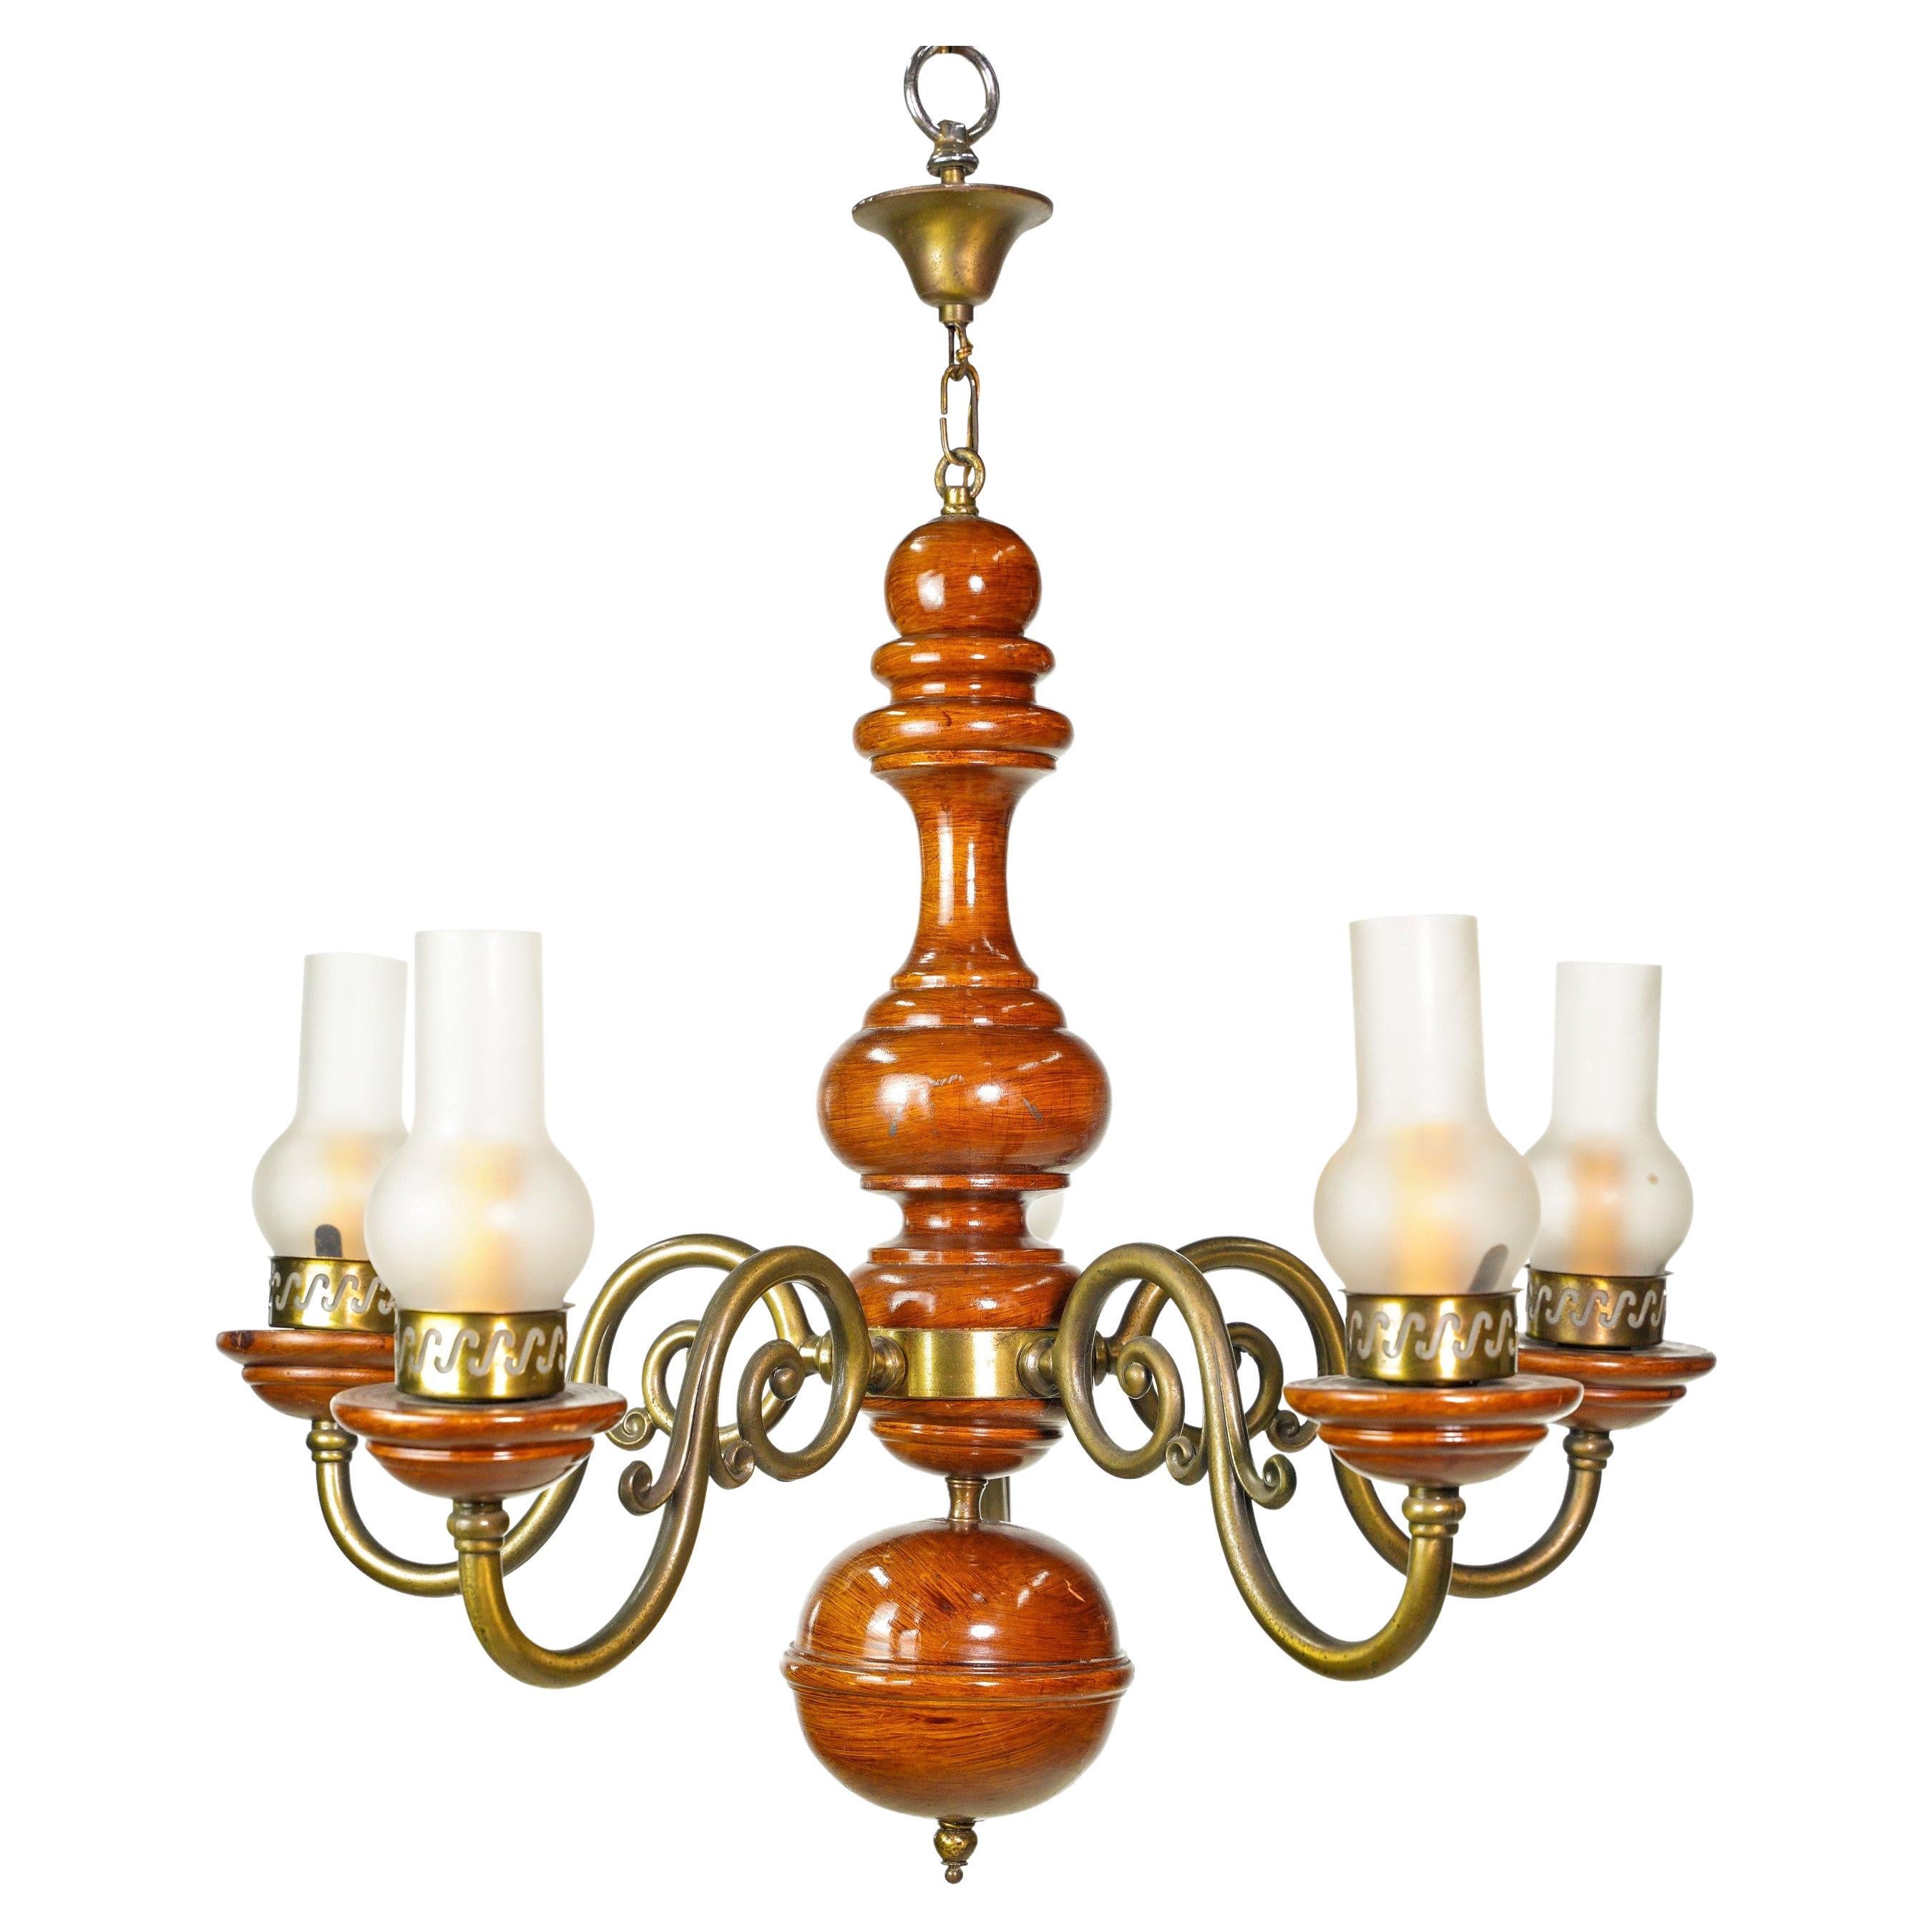 5 Brass Plated Arms Medium Tone Wood Chandelier For Sale